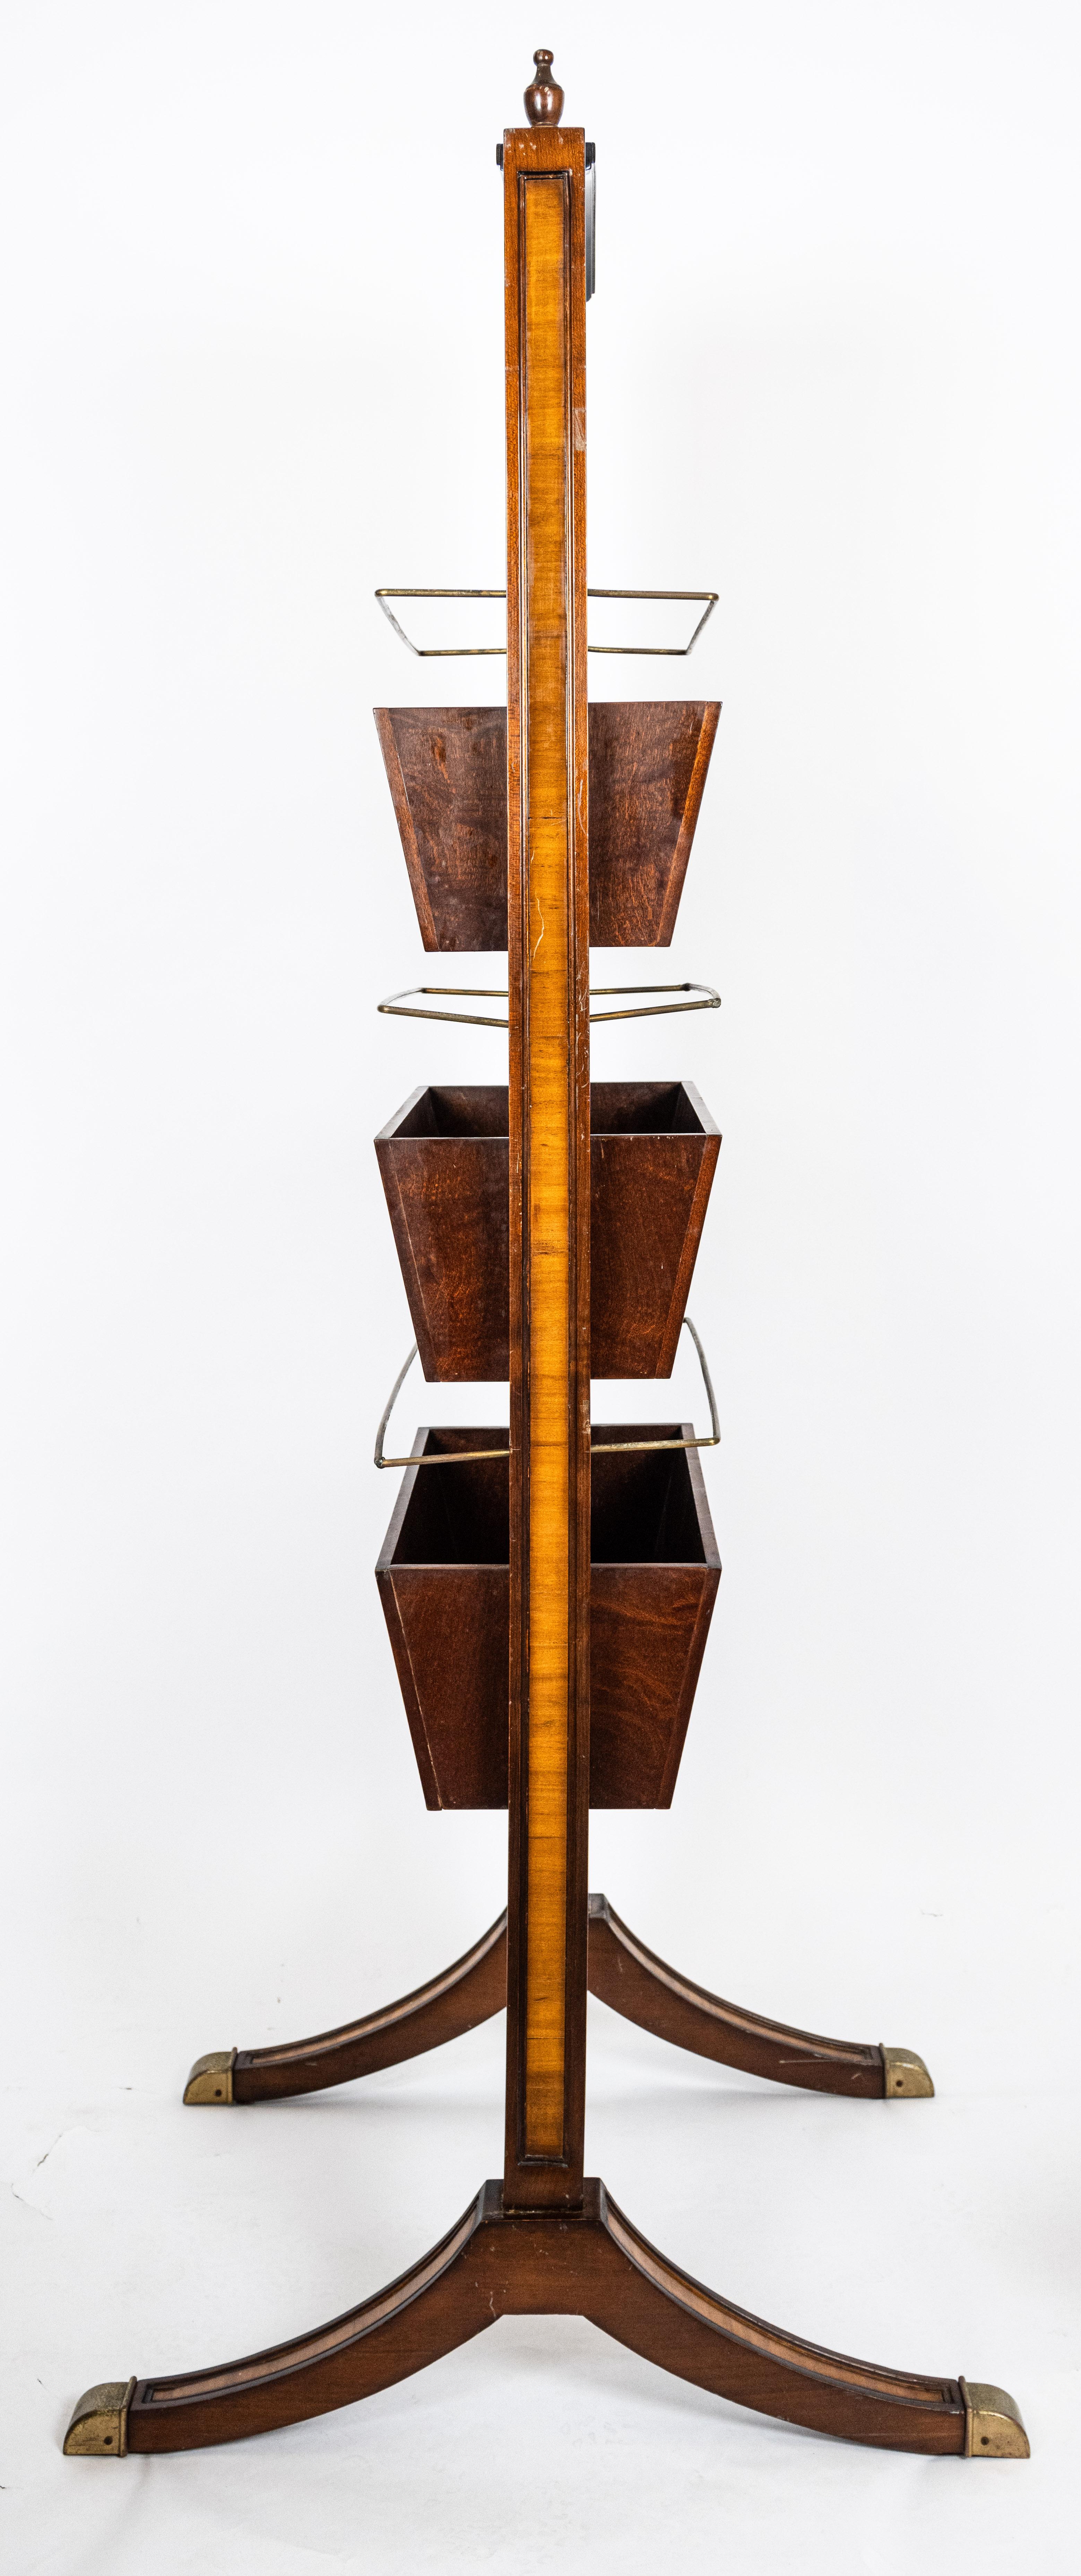 A freestanding Georgian style mahogany and mahogany veneered stand. Each side with wooden pockets below four brass newspaper rails. Designed for the display of newspapers and magazines. The vertical rectangular form with an arched top, molded edges,